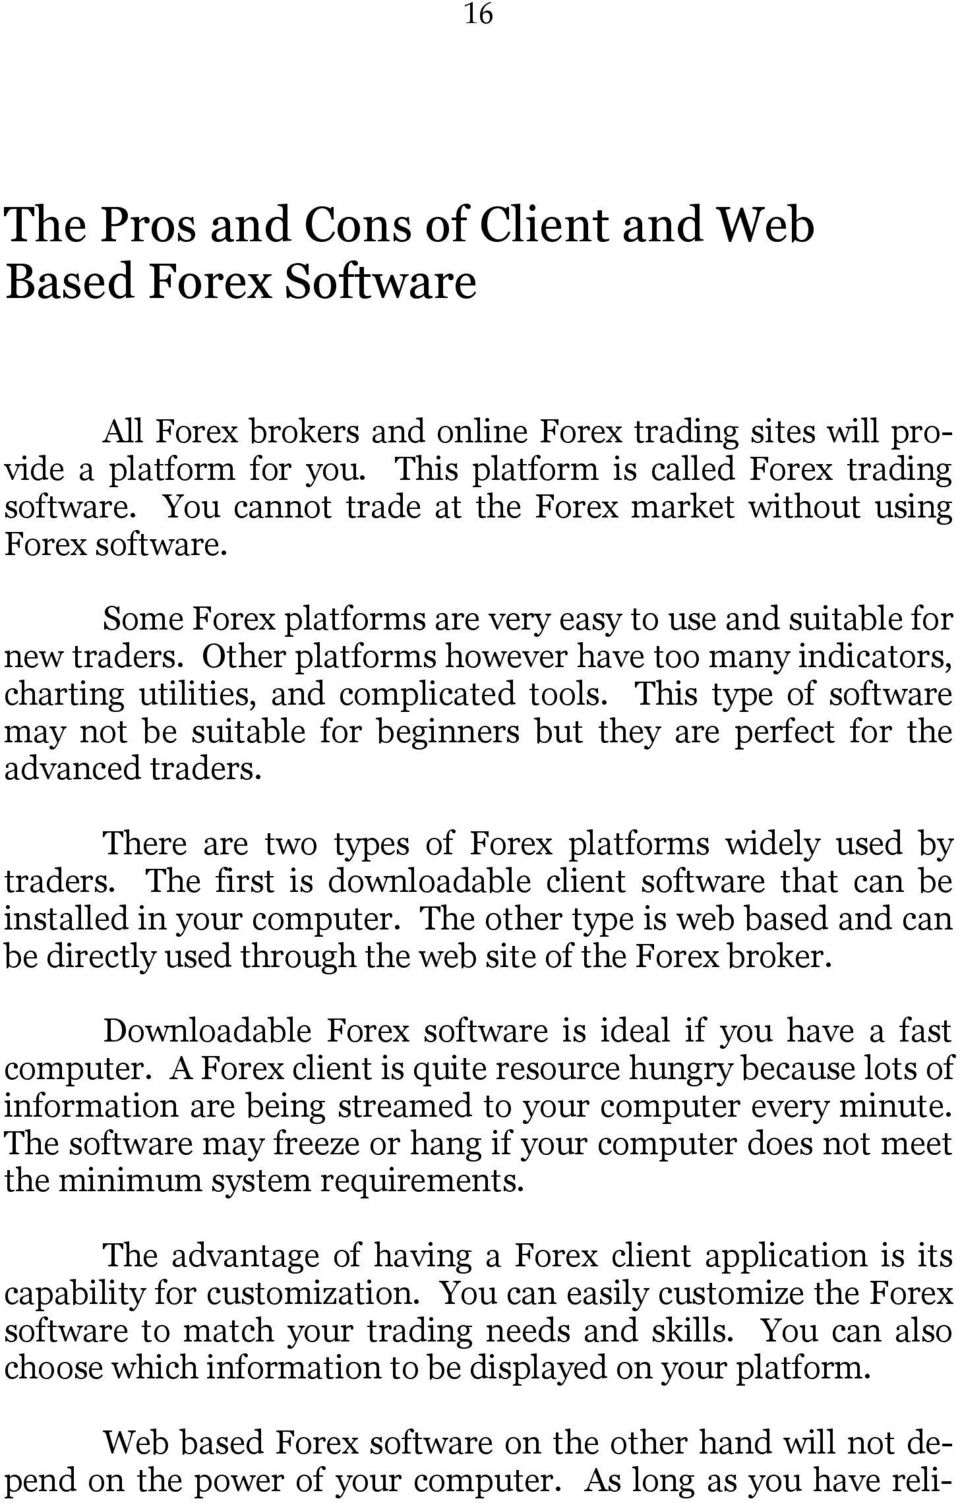 Other platforms however have too many indicators, charting utilities, and complicated tools. This type of software may not be suitable for beginners but they are perfect for the advanced traders.